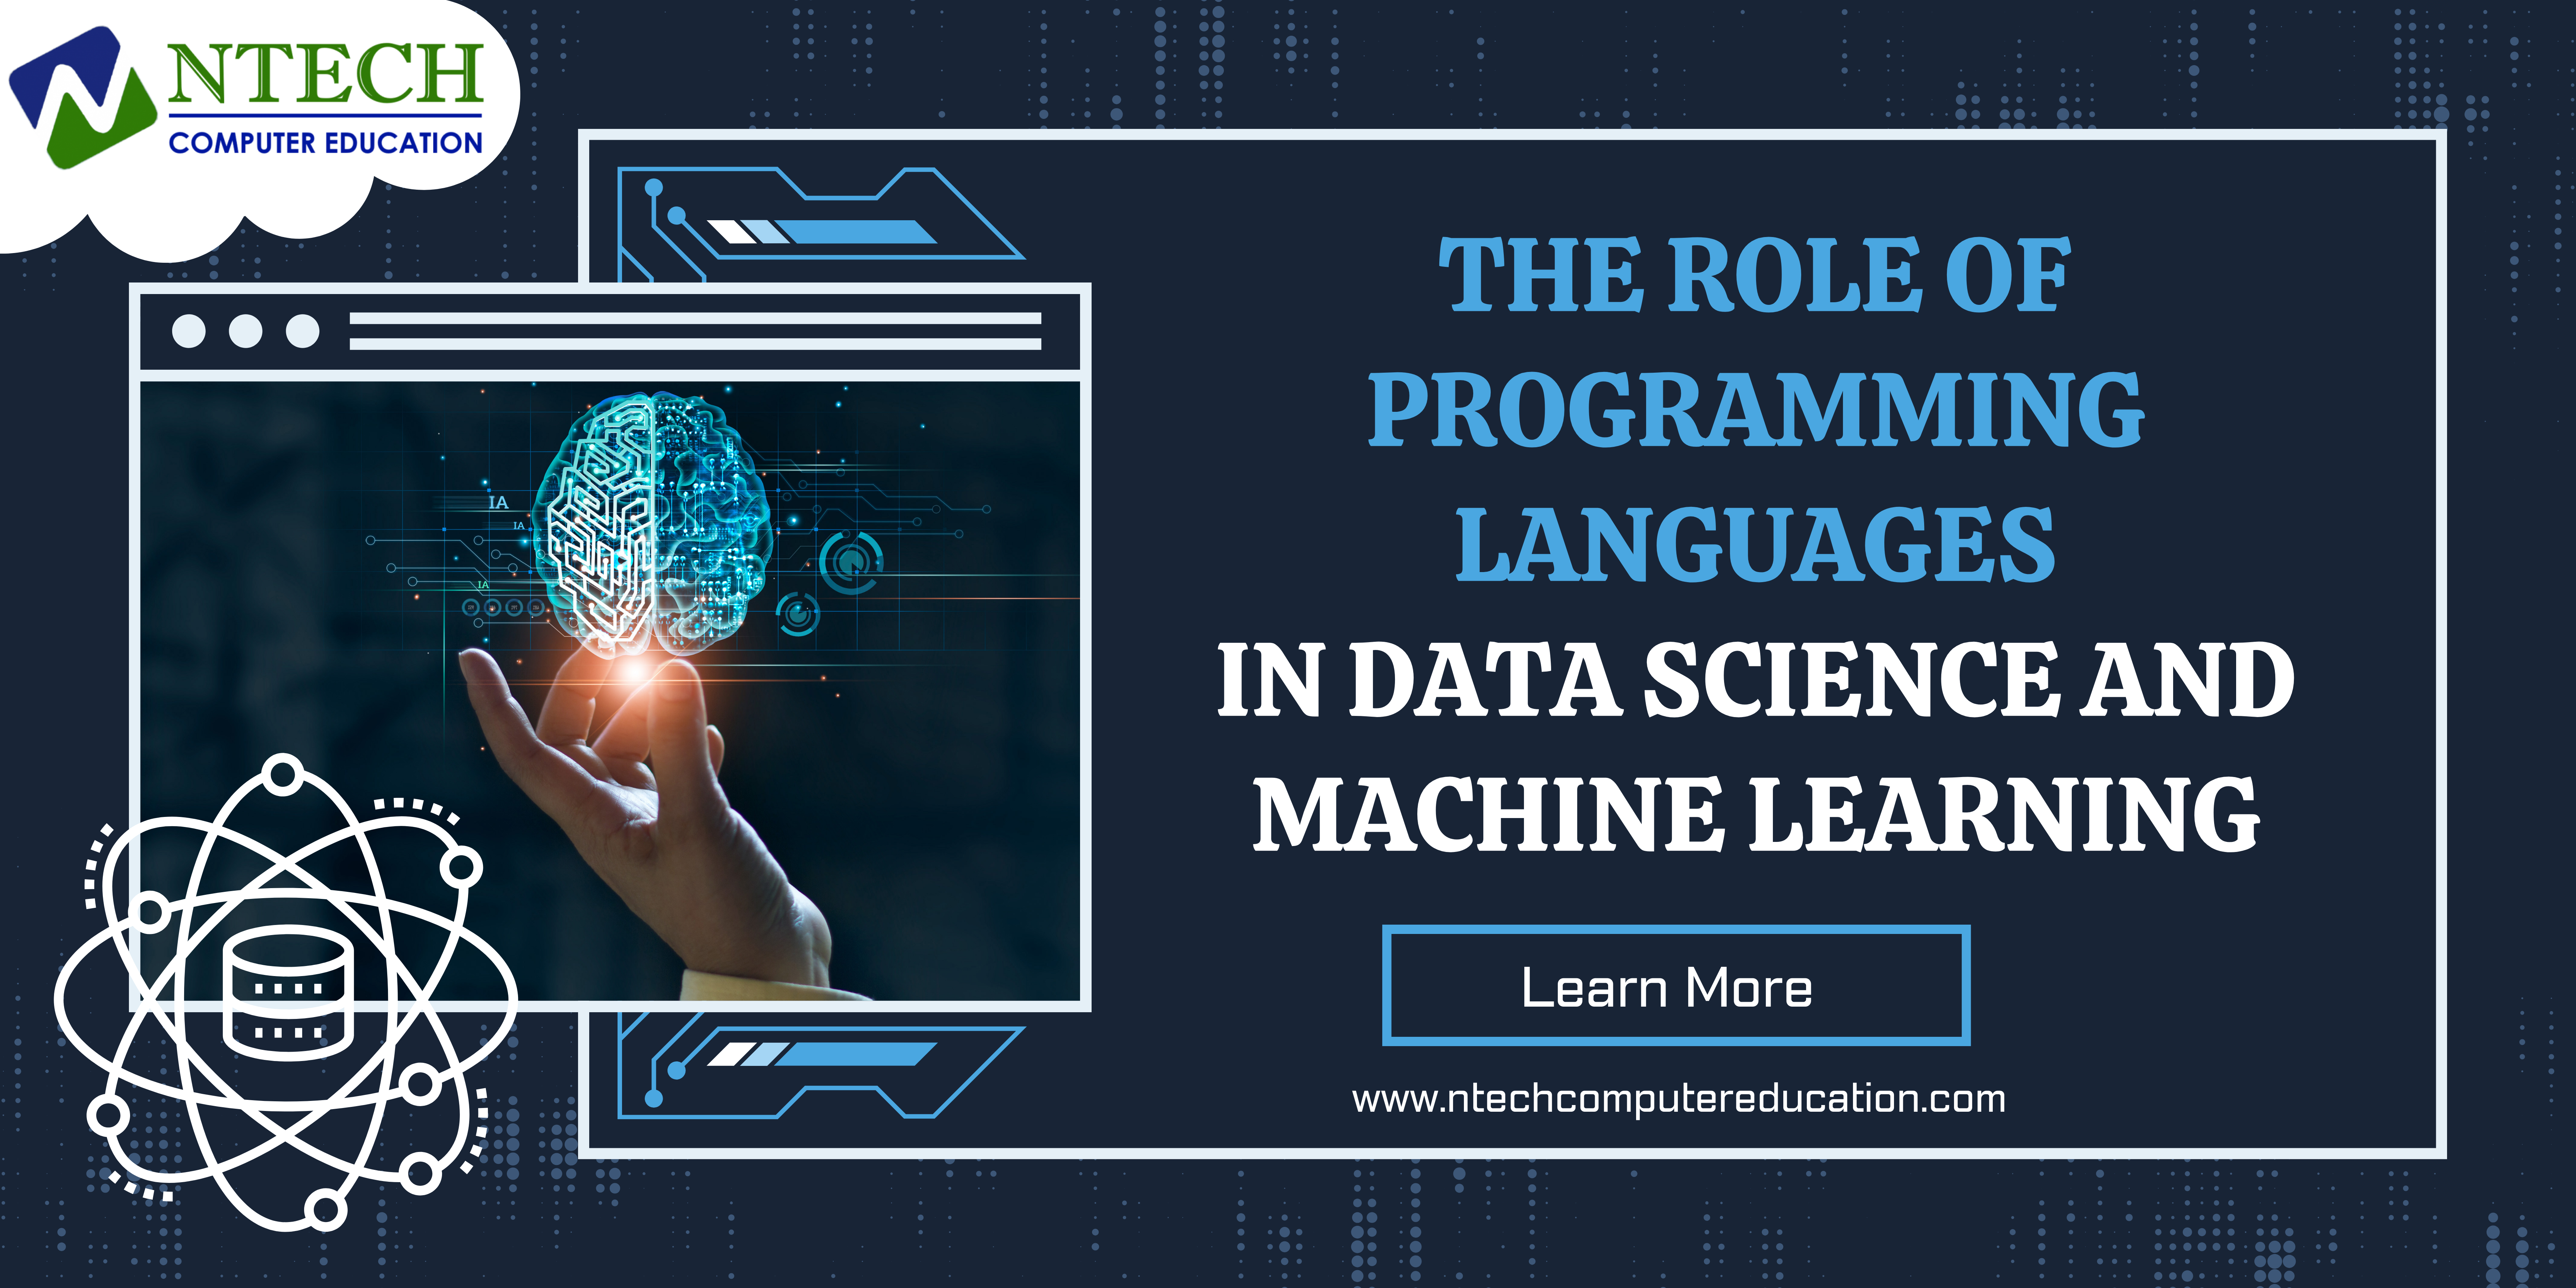 data science and machine learning